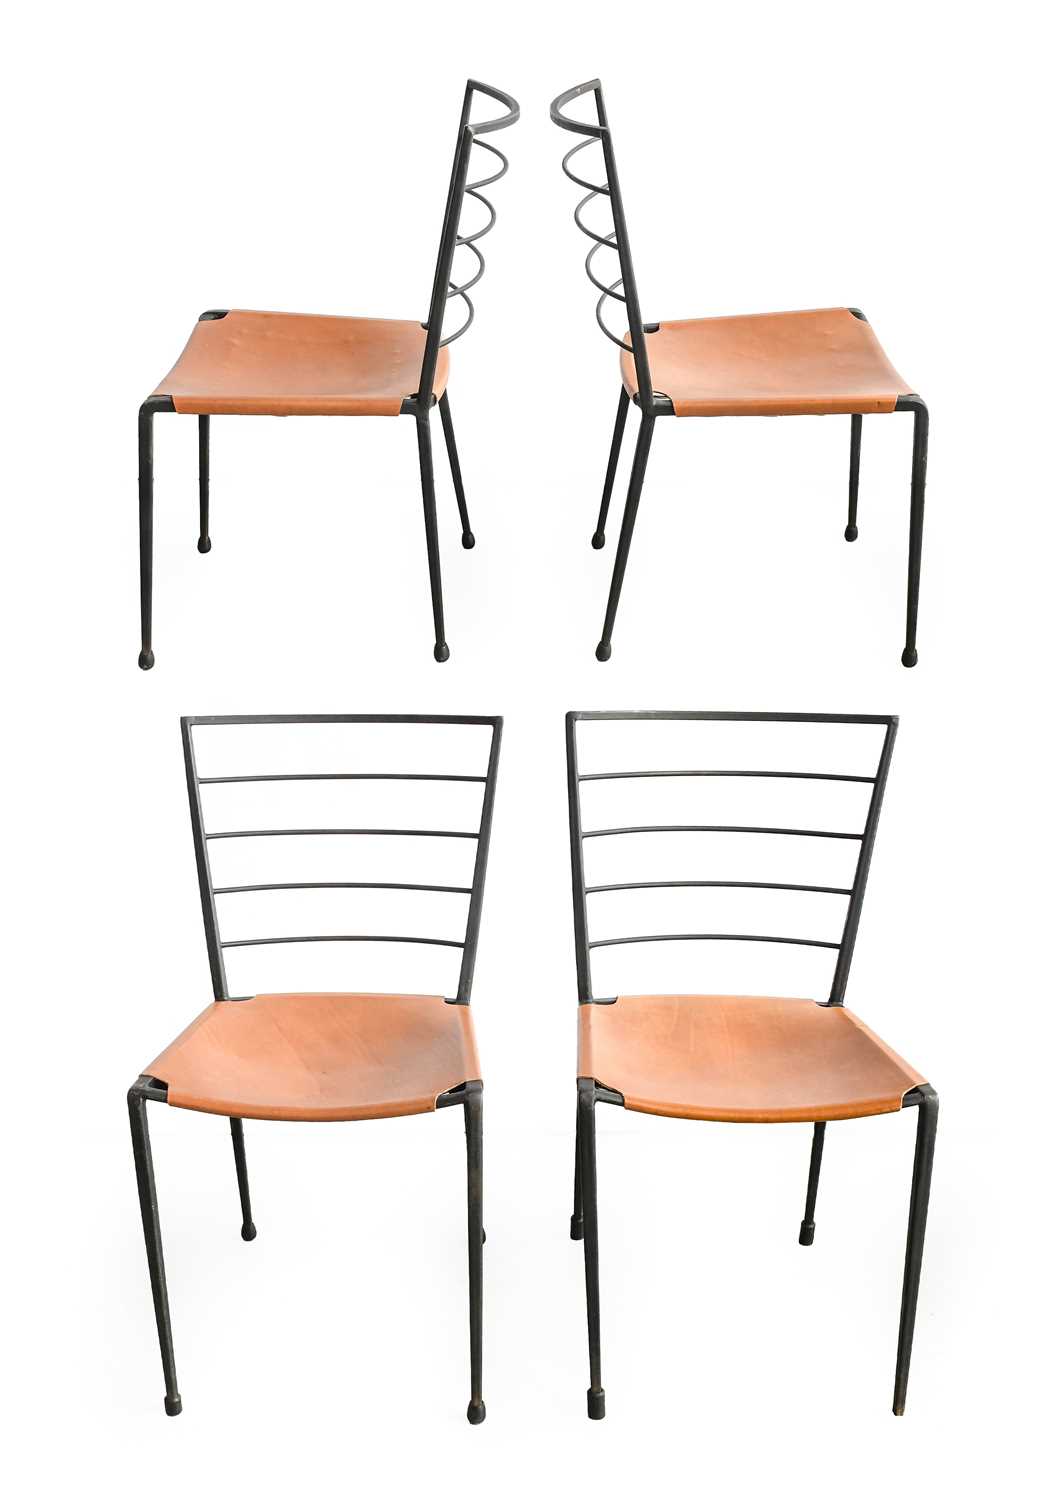 A Set of Four Staples Ladderax Dining Chairs, designed by Robert Heal, black steel frame, with tan